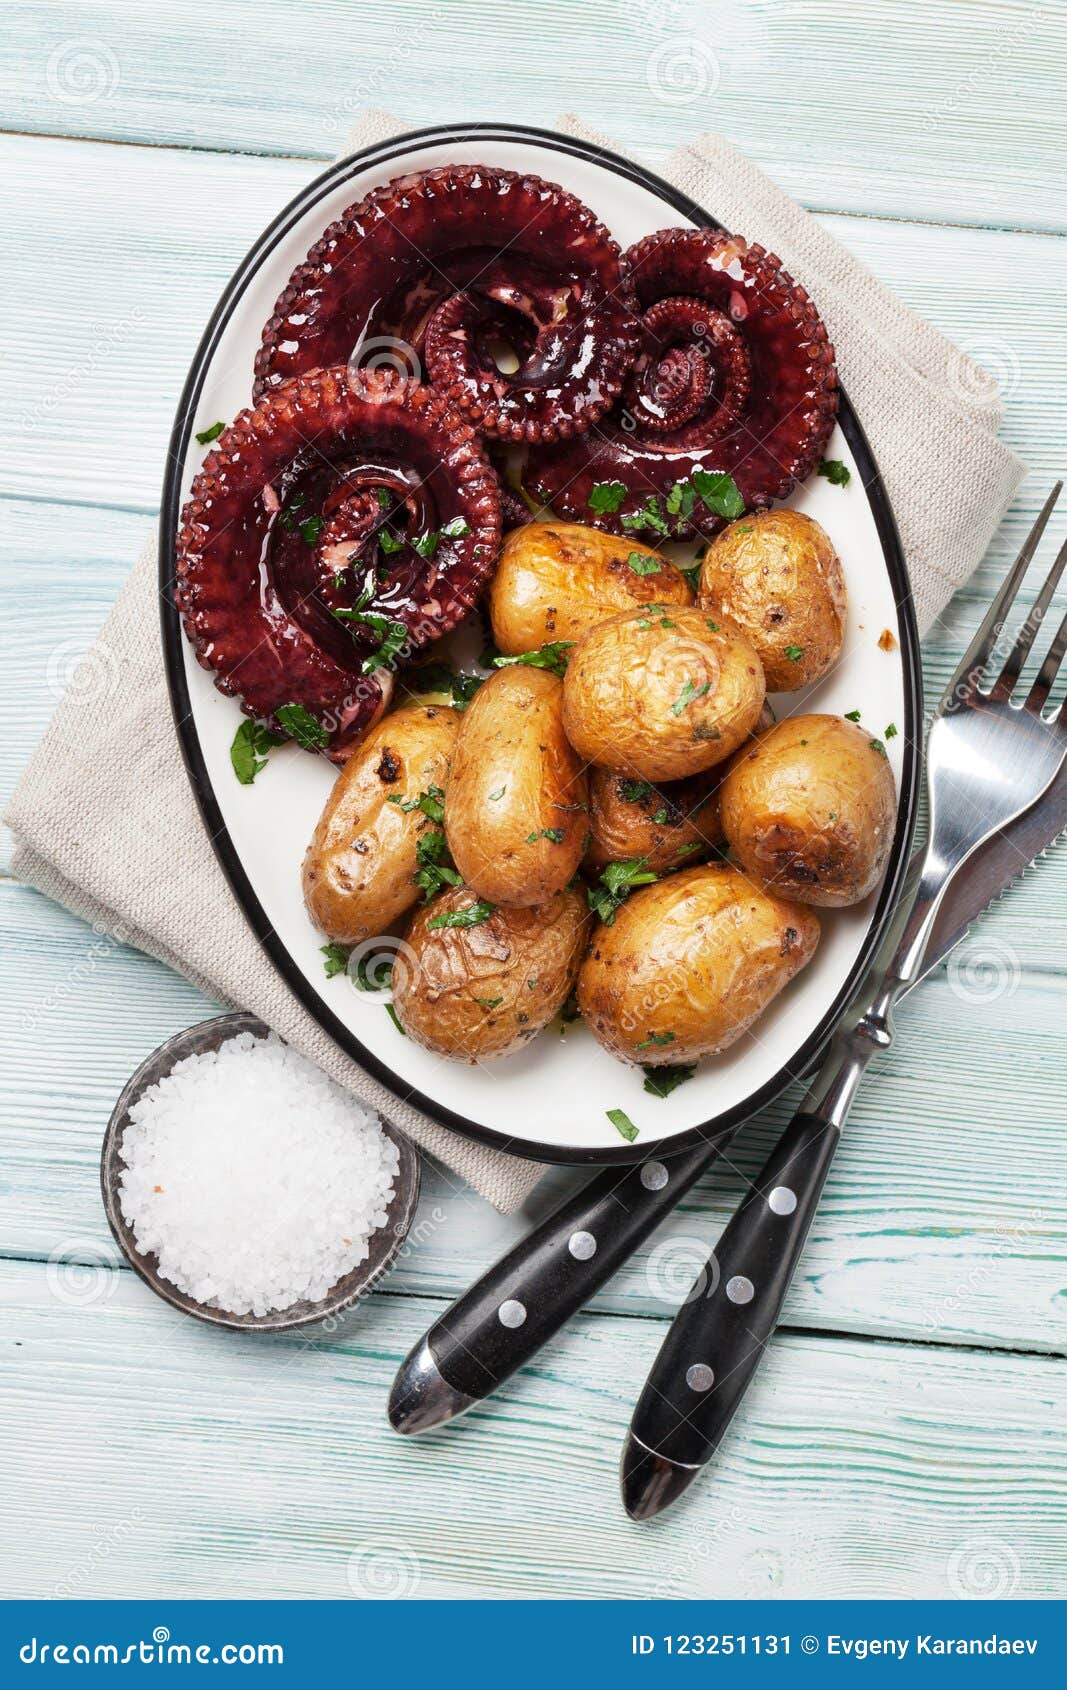 Grilled Octopus with Small Potatoes Stock Image - Image of prepared ...